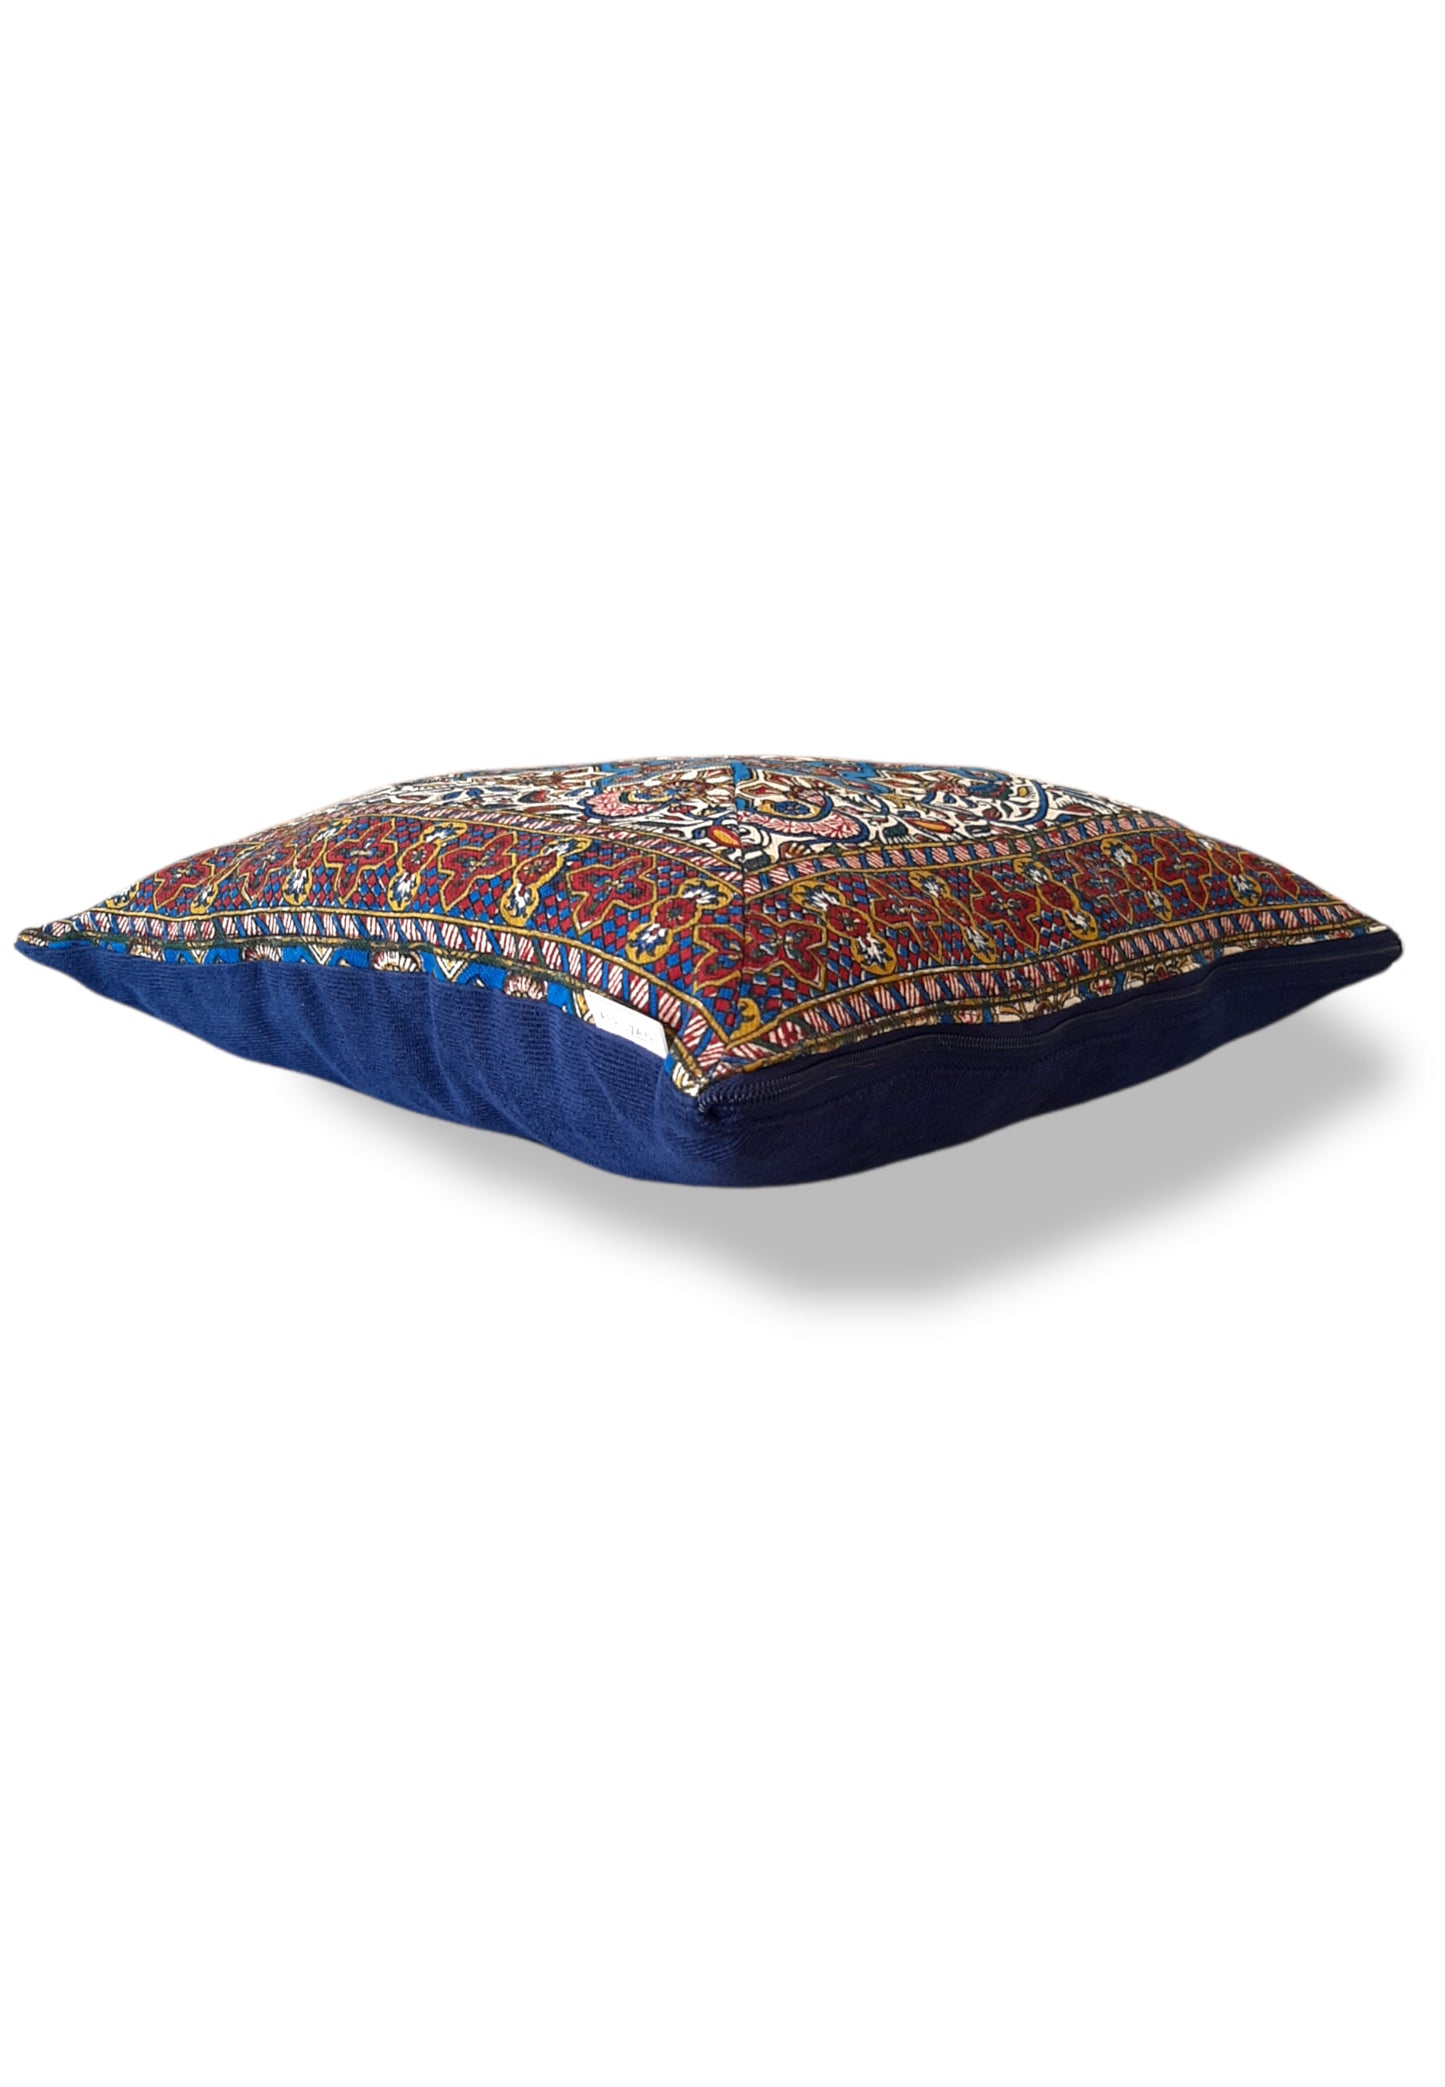 AFROZAN Hand-printed Cushion Cover - Multicolour-02